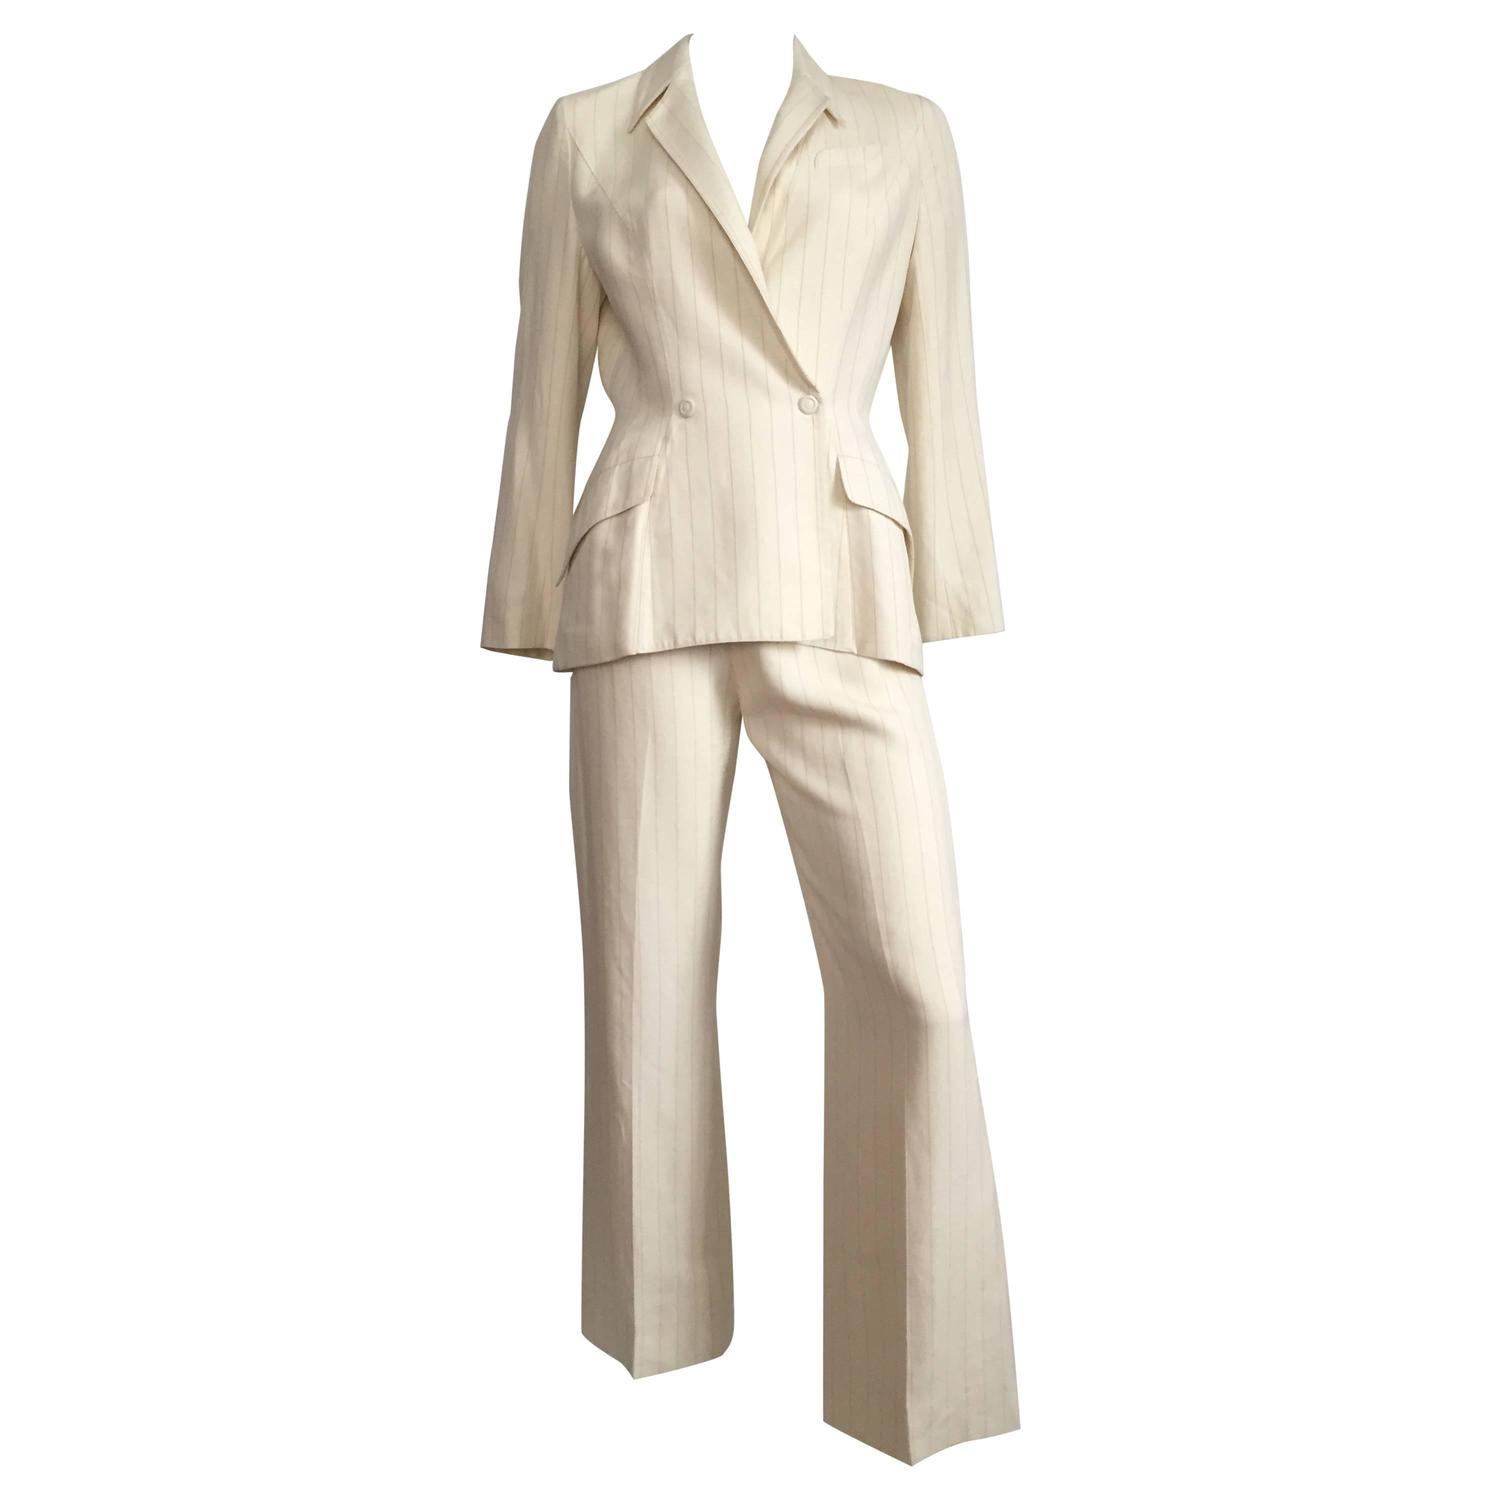 Thierry Mugler 80s striped cream linen suit size 6. For Sale at 1stdibs